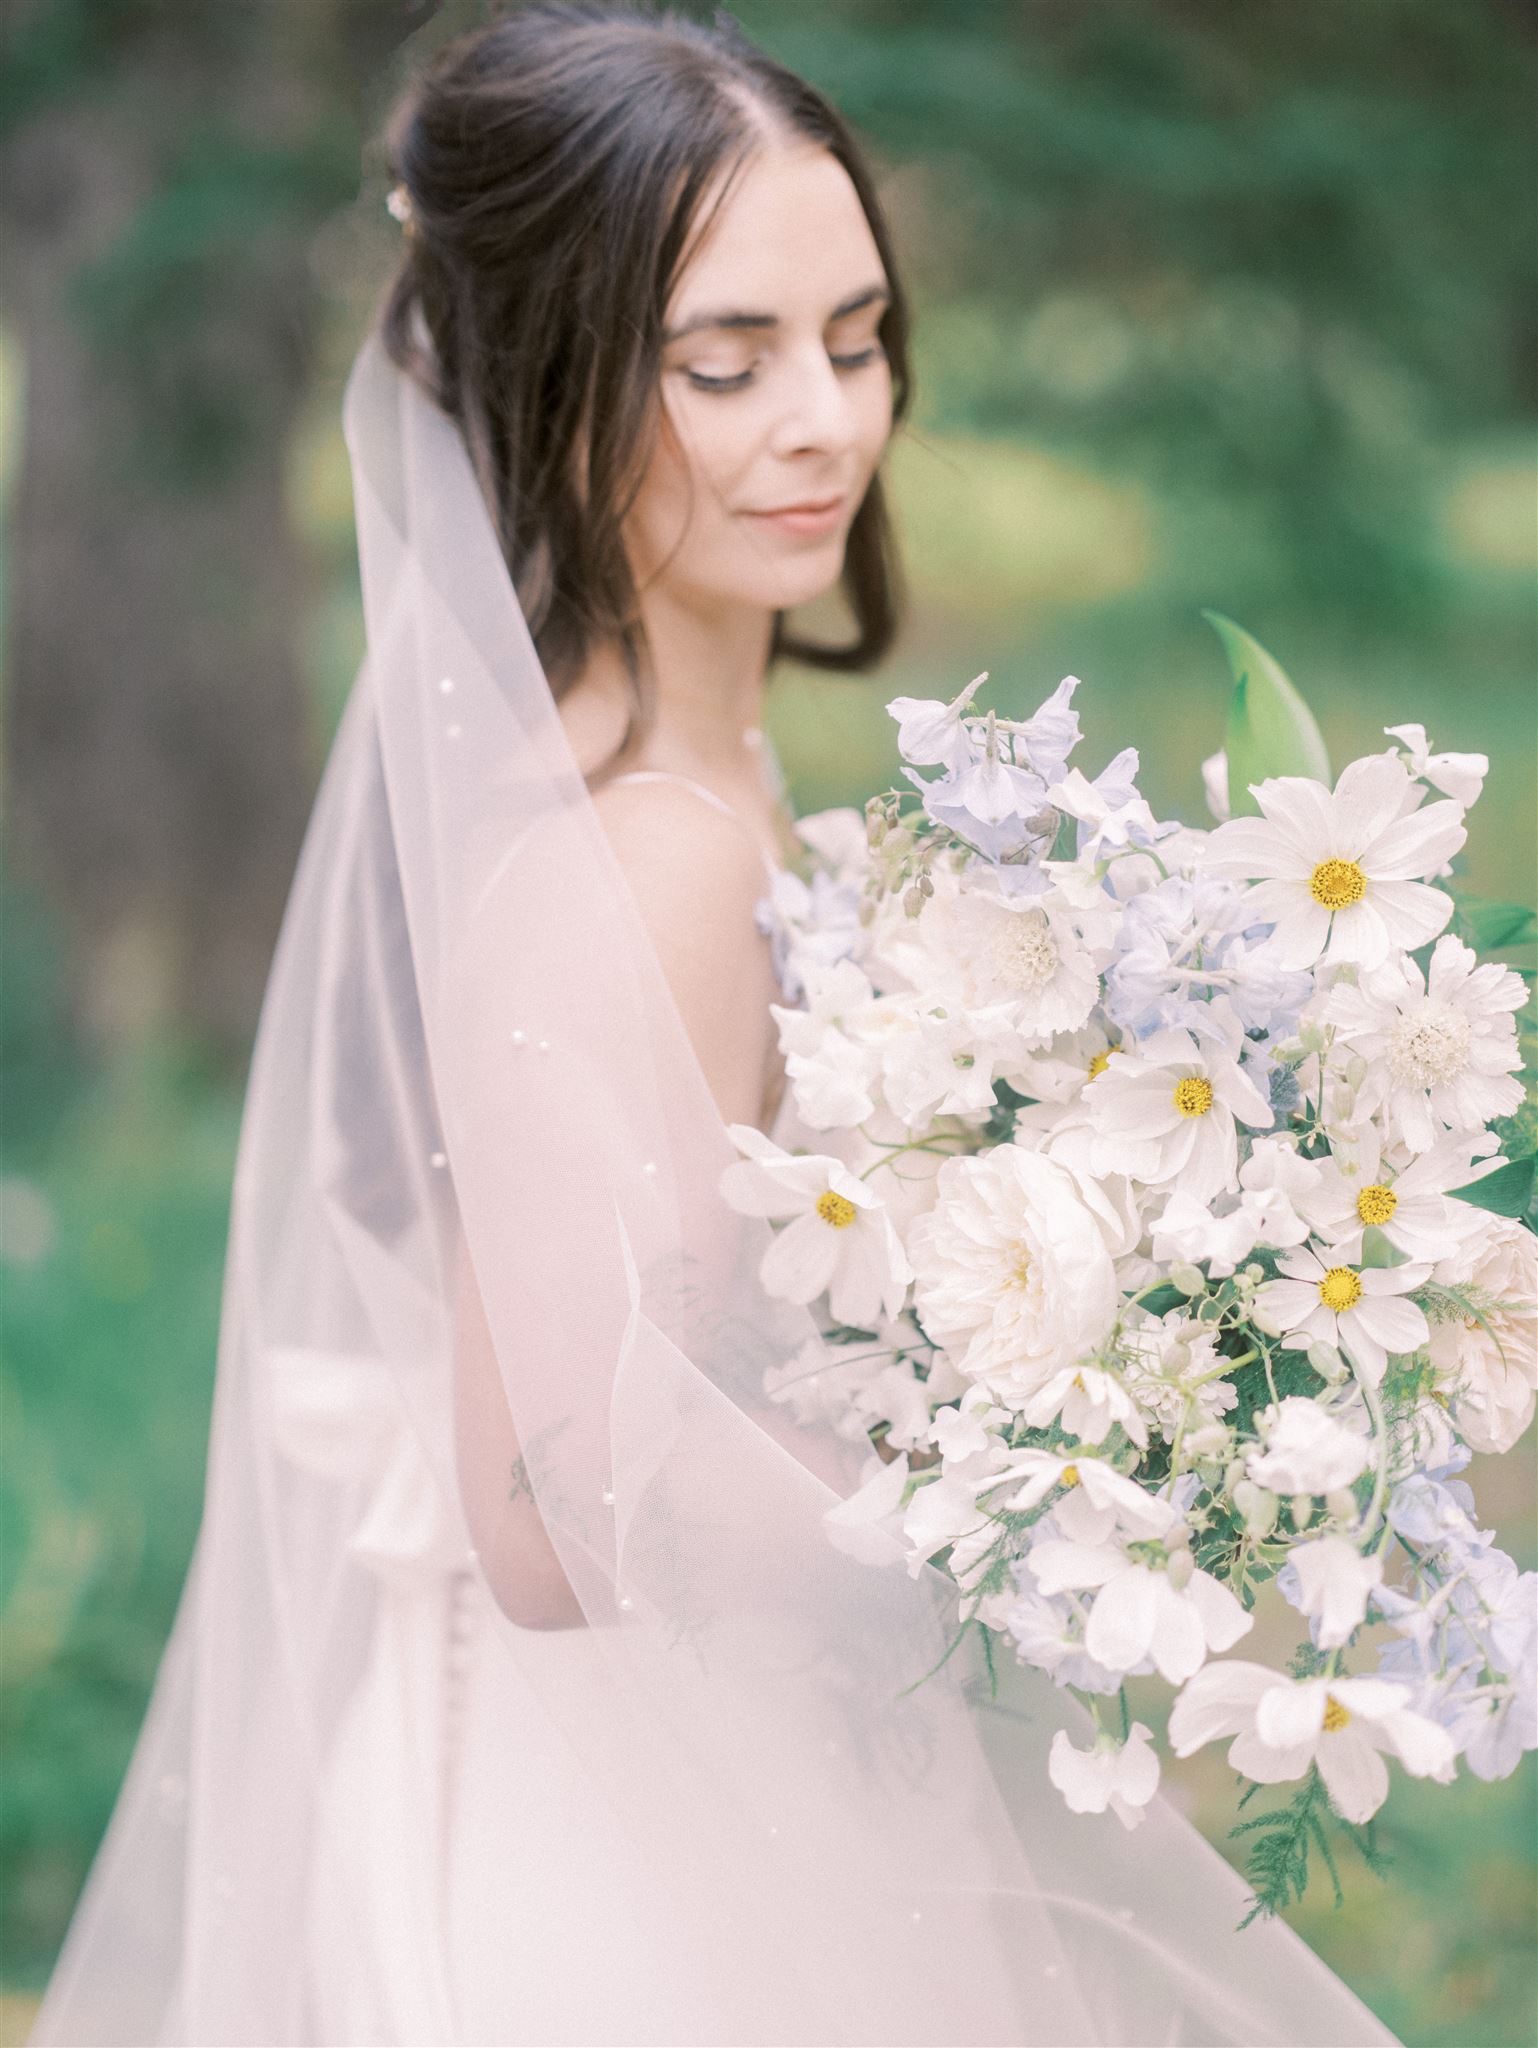 10 Wedding Details You Must Have, wedding planning, bride holding bouquet, nicole sarah, calgary wedding planning, bride with veil looking down at flowers, pastel bouquet wedding, large wedding bouquet